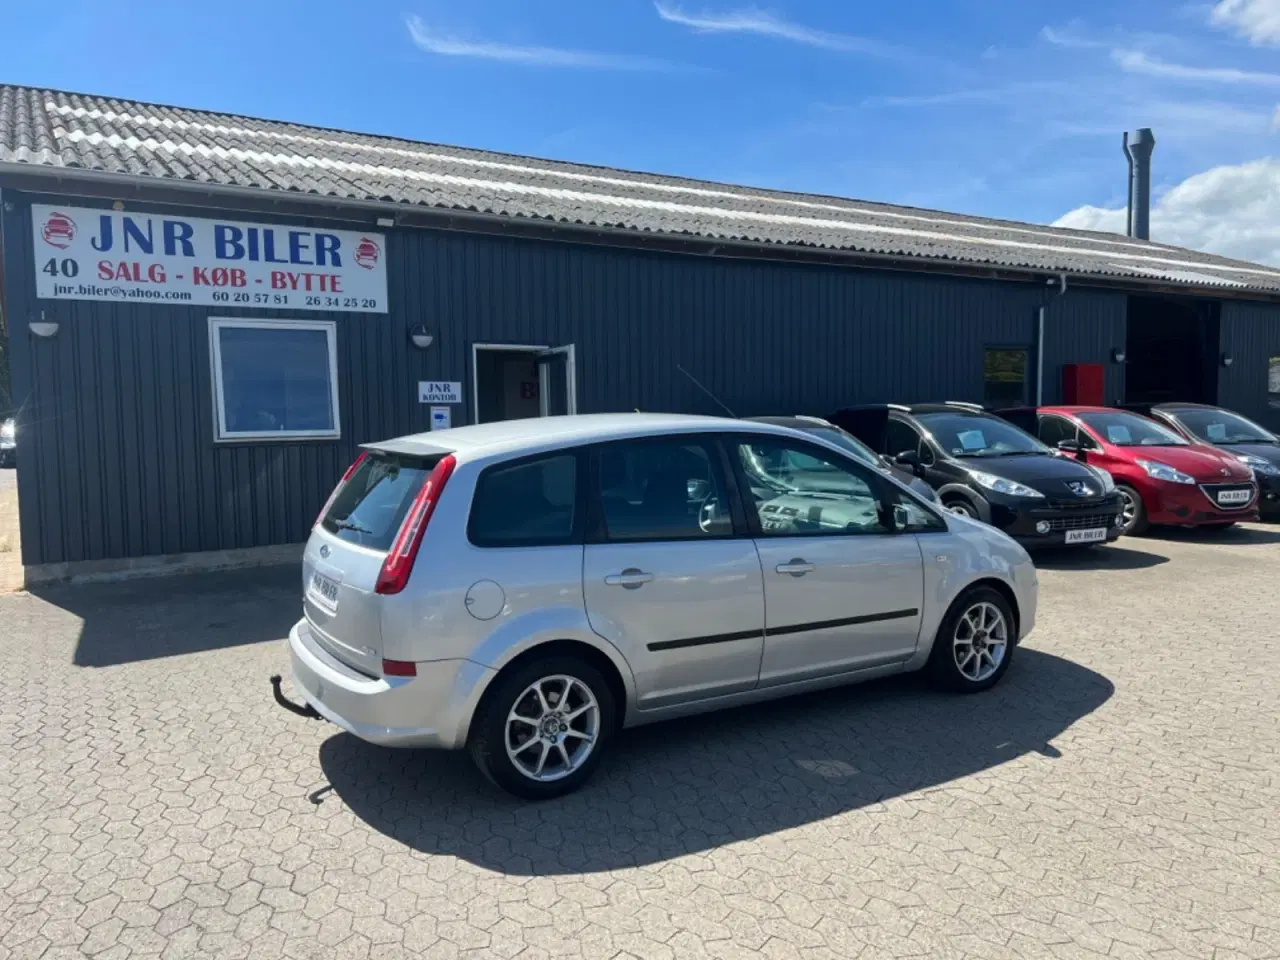 Billede 7 - Ford C-MAX 1,6 TDCi 90 Trend Collection